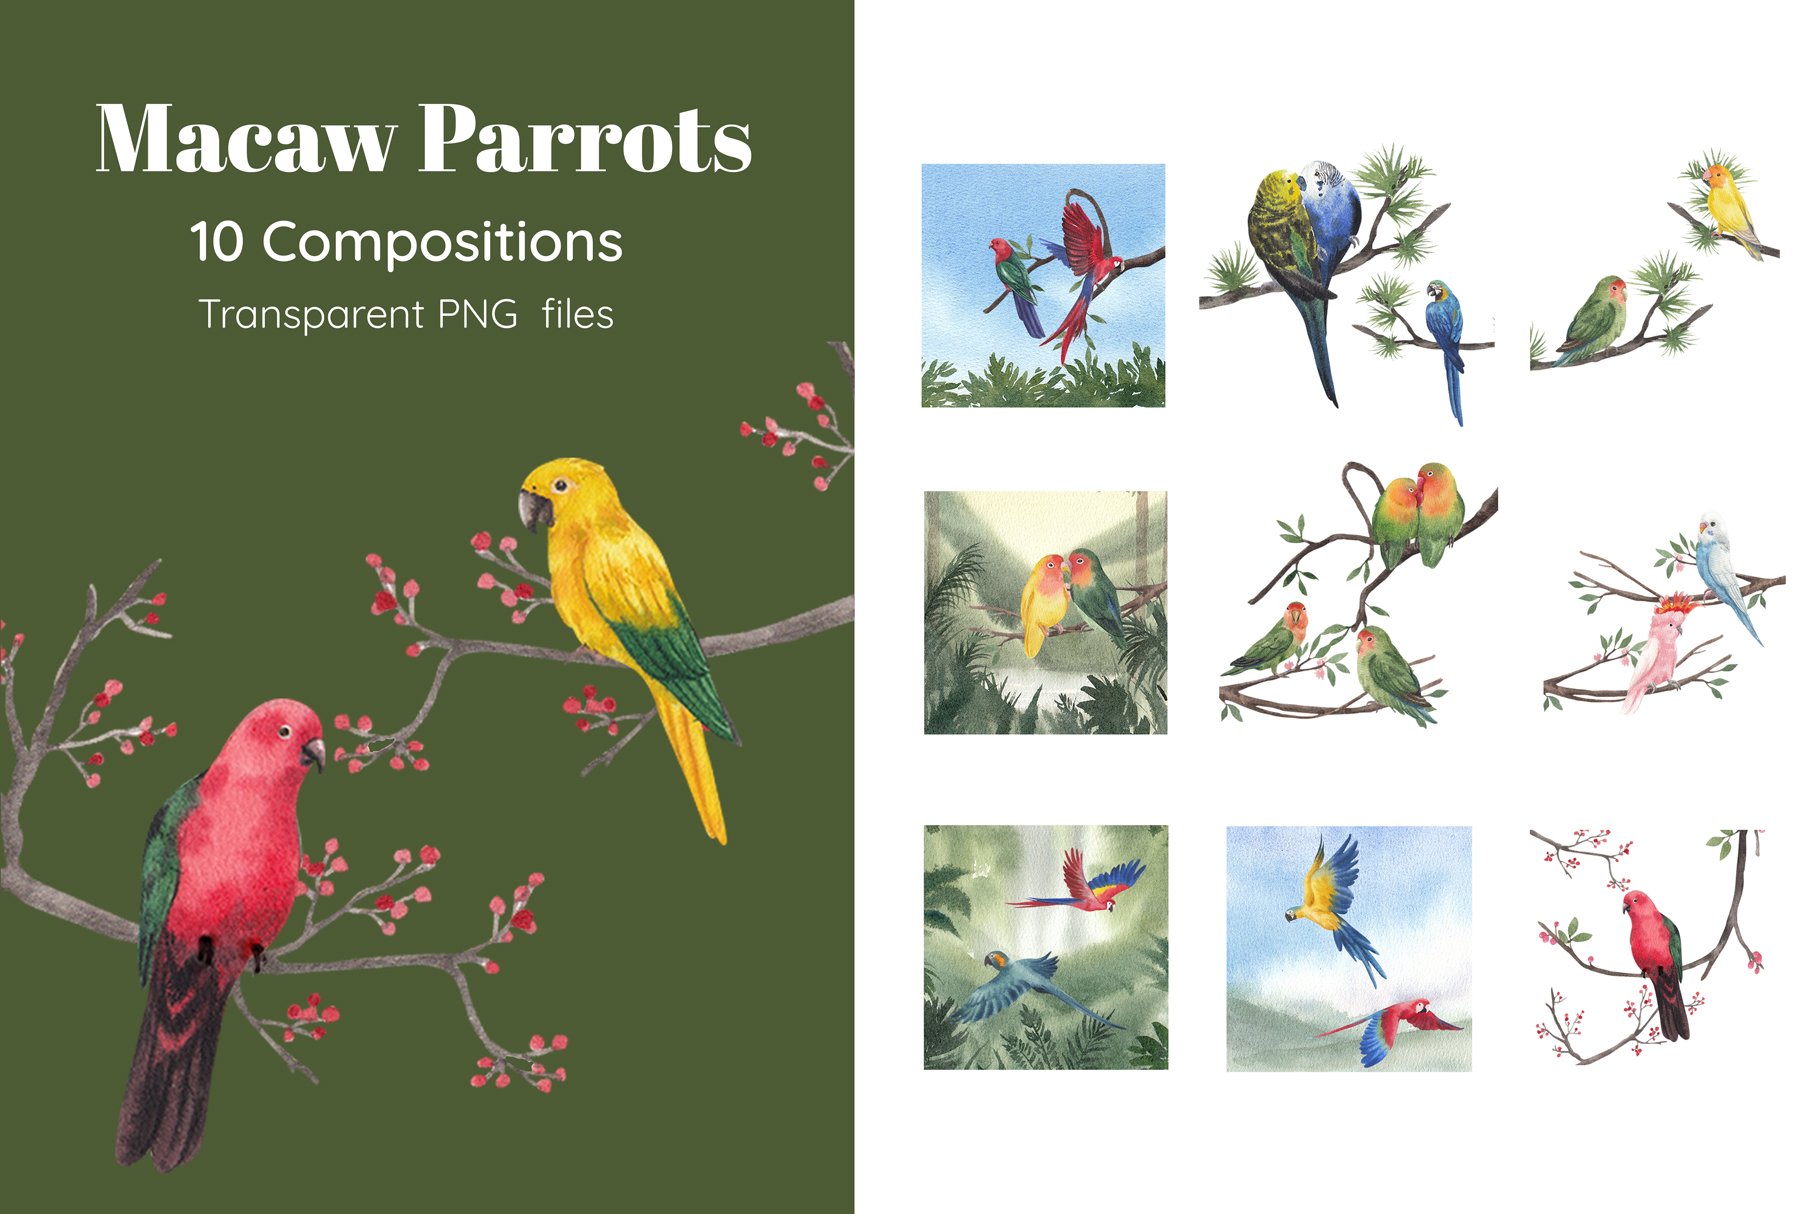 Macaw parrot presentation composition for you.